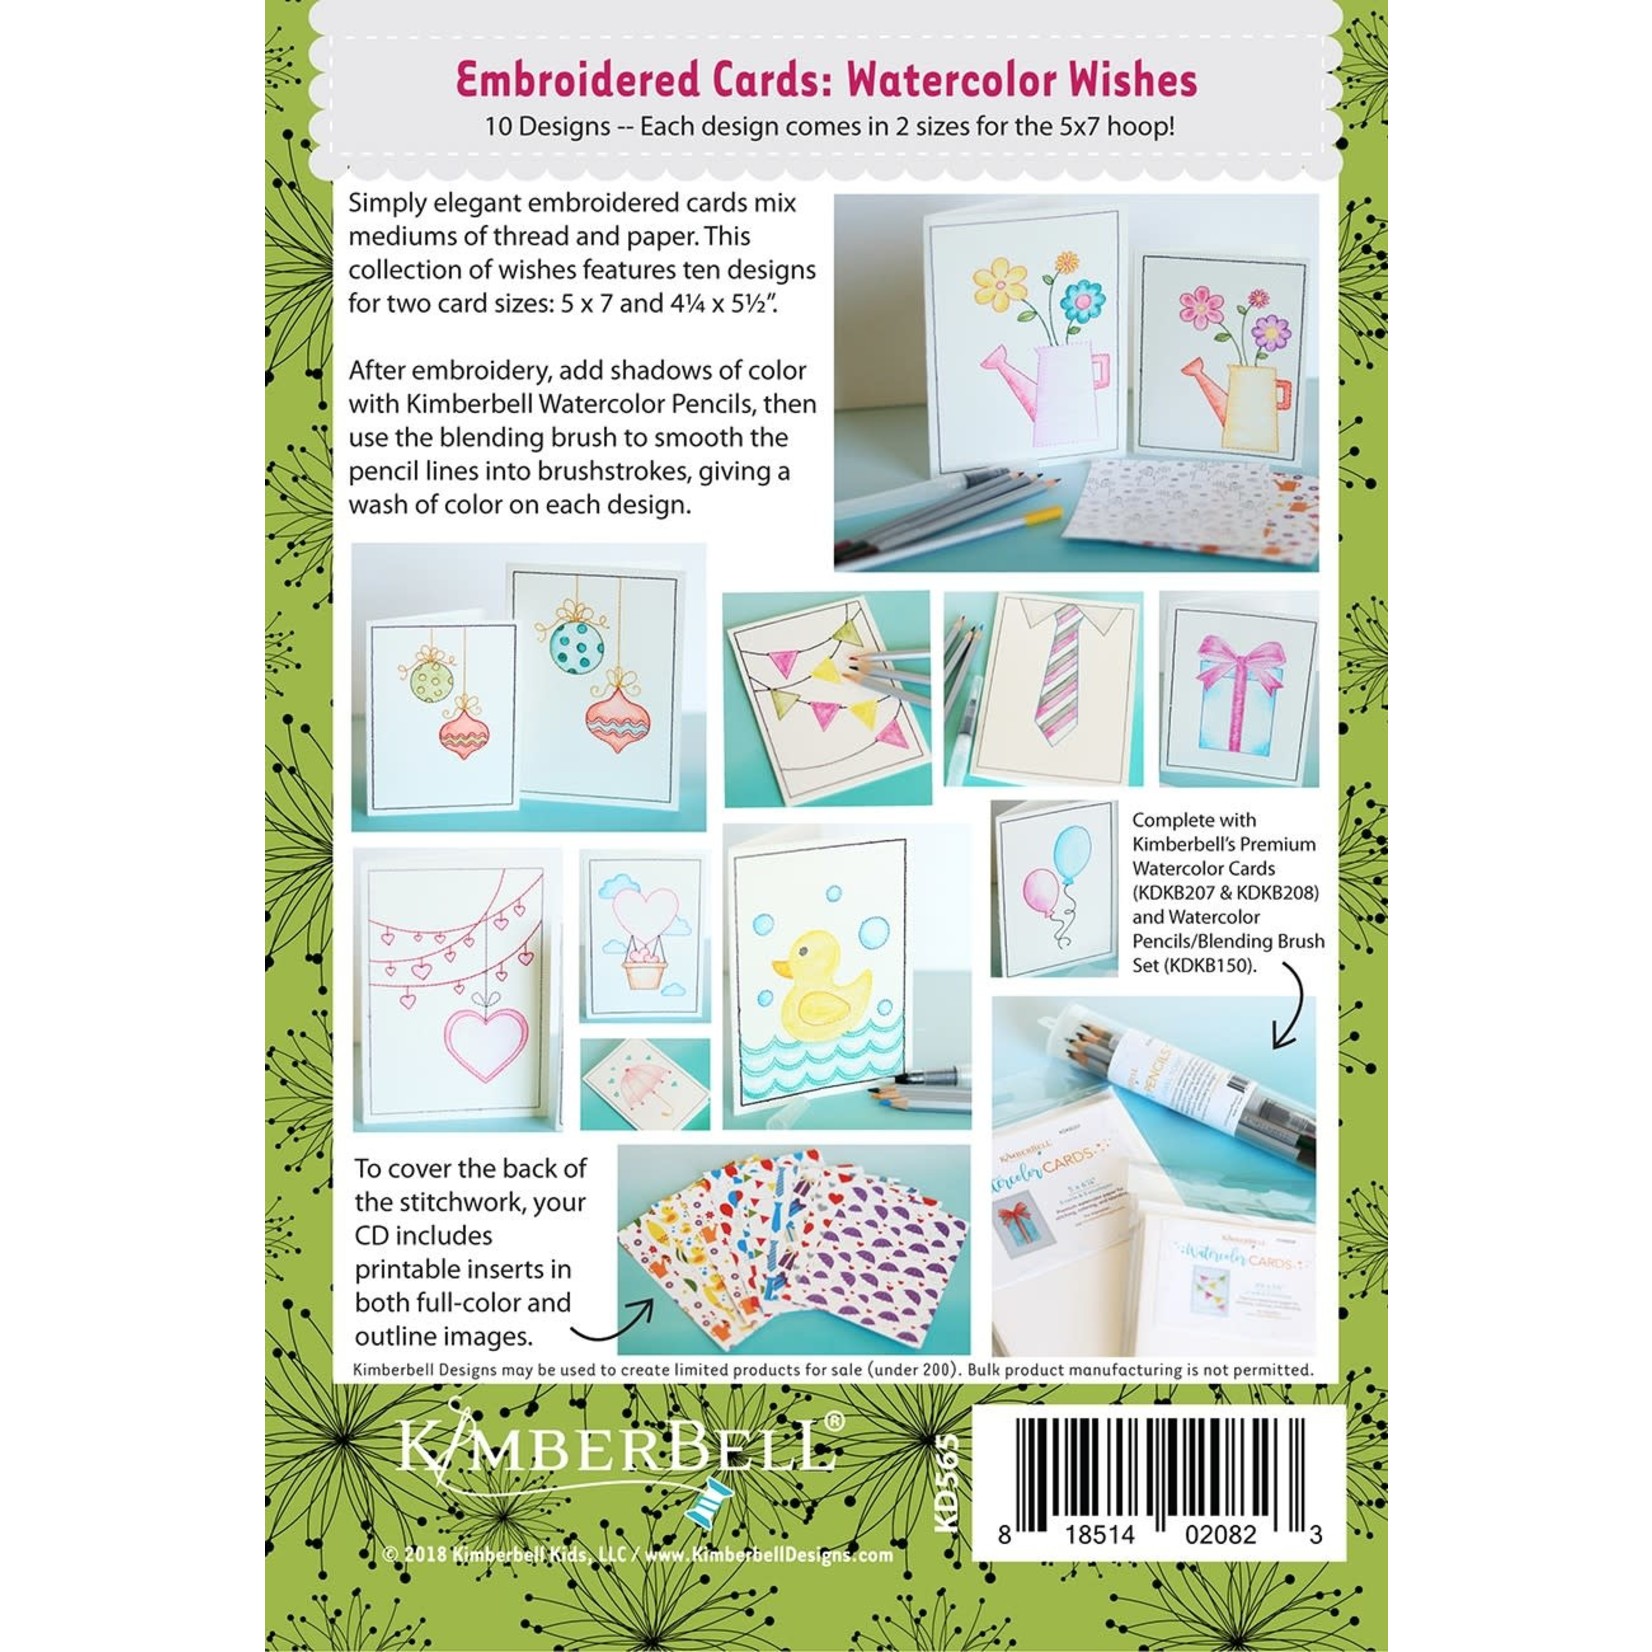 Kimberbell Designs Embroidery Cards: Watercolor Wishes (RETIRED)